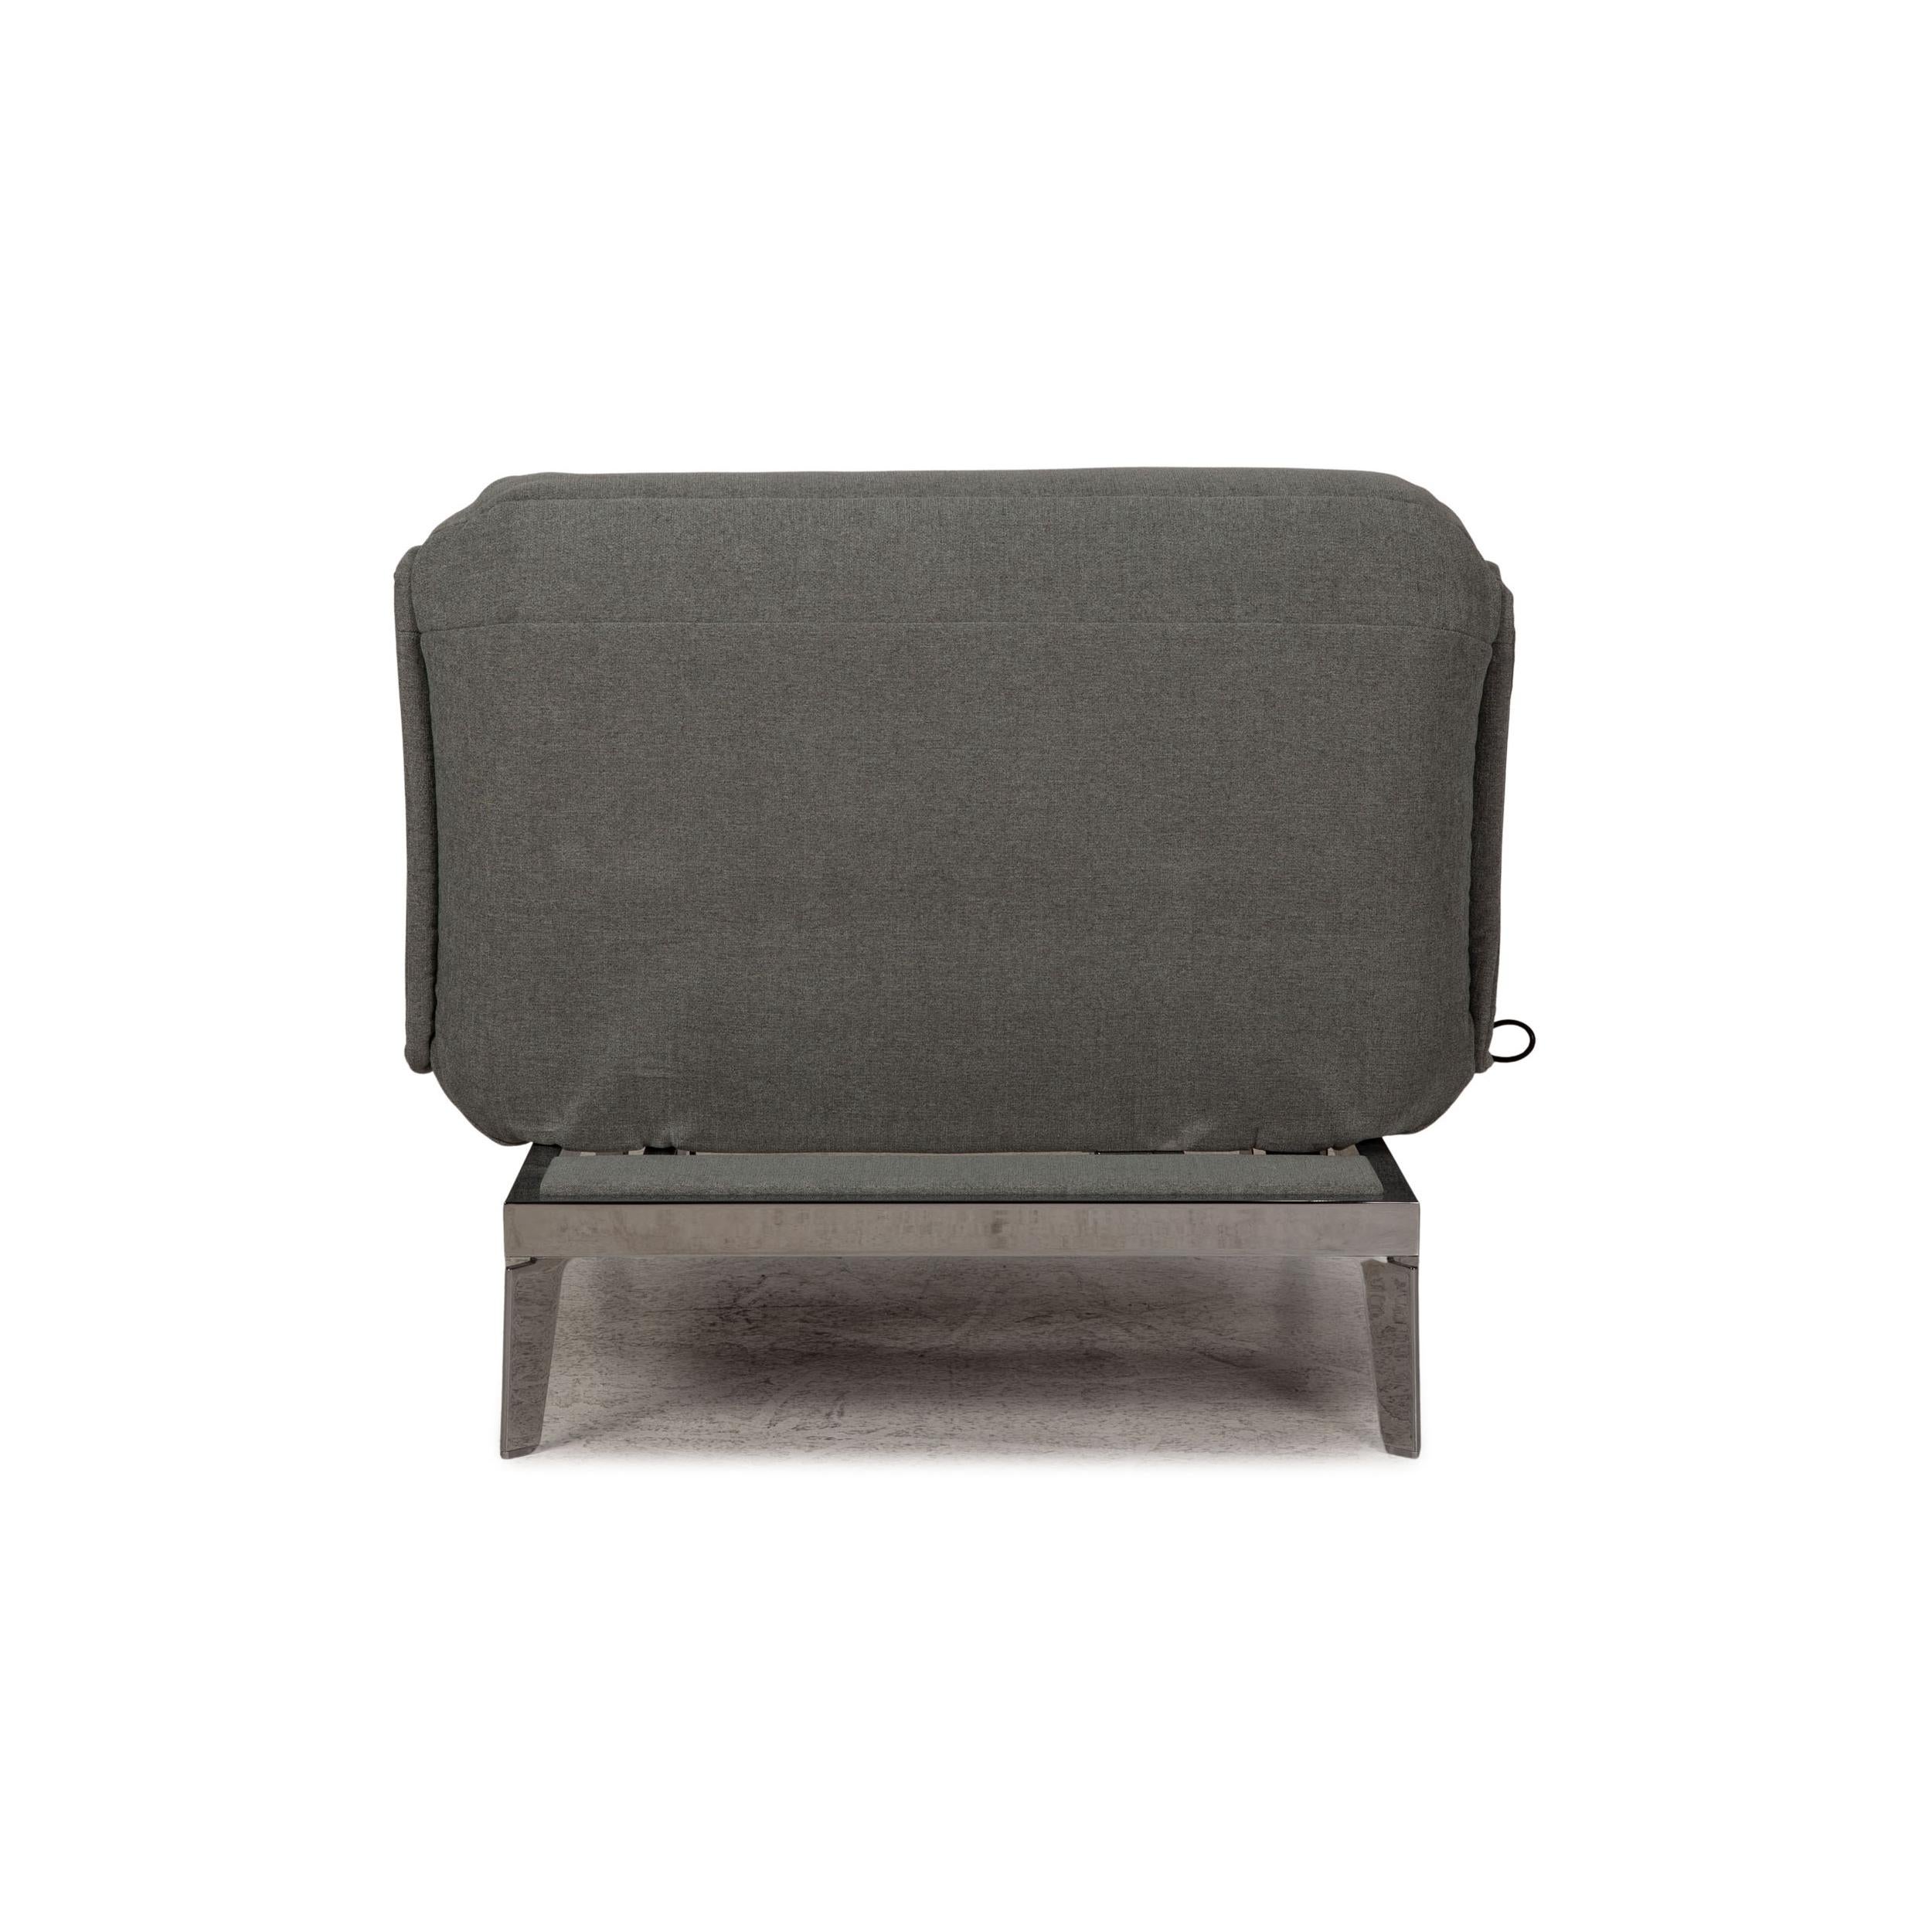 Contemporary Rolf Benz Nova 340 Fabric Armchair Gray Function Relax Function For Sale